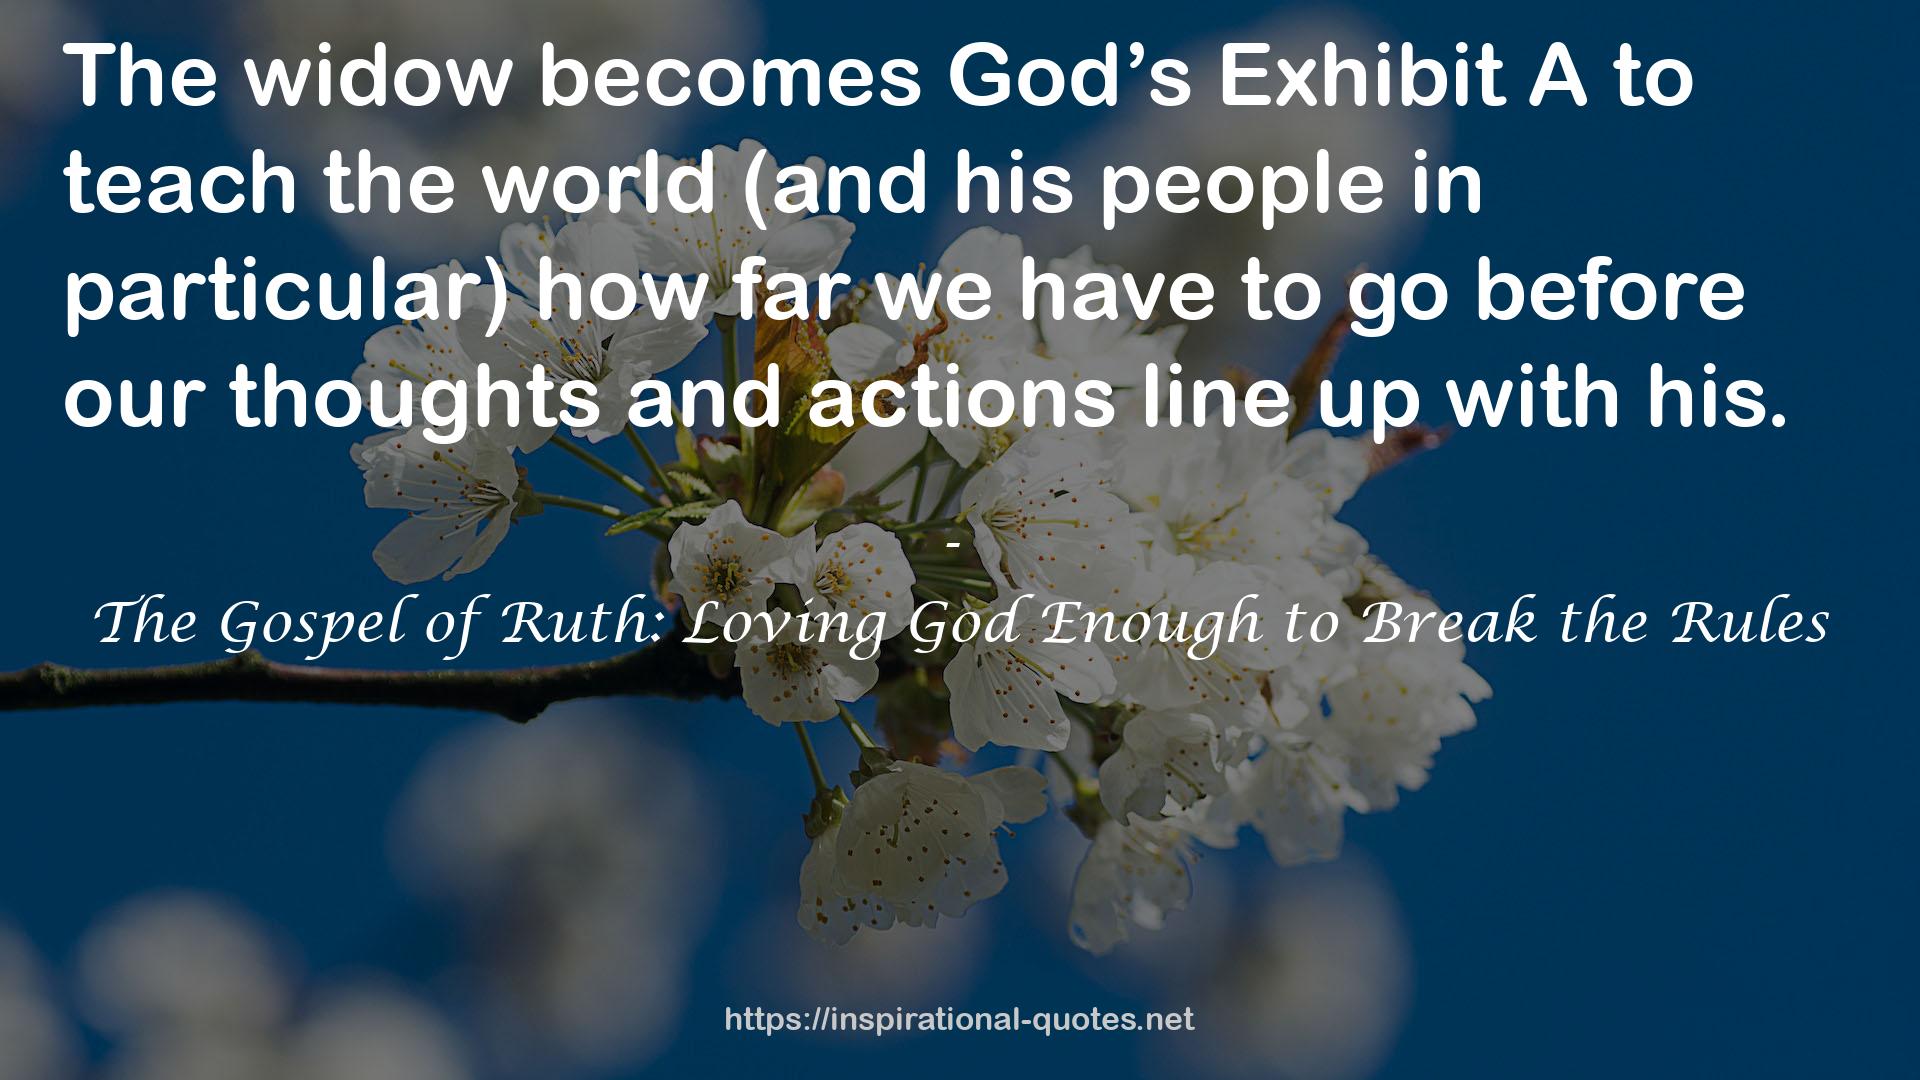 The Gospel of Ruth: Loving God Enough to Break the Rules QUOTES